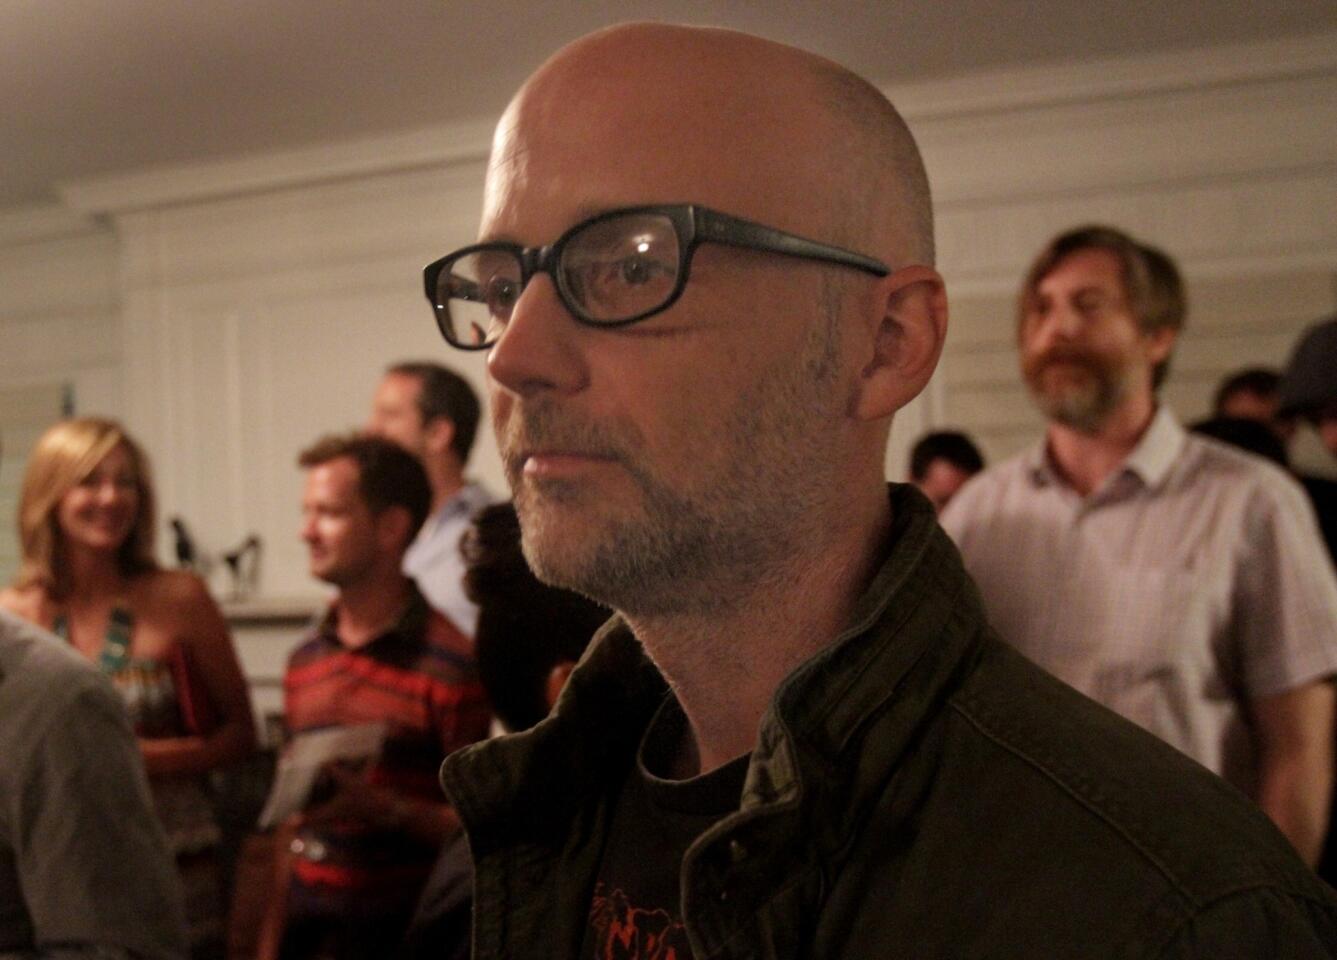 Musician Moby was on hand to read portions of Moby Dick, saying, "I don't think that either of my parents thought that 47 years later, I would still be saddled with my infant joke nickname."